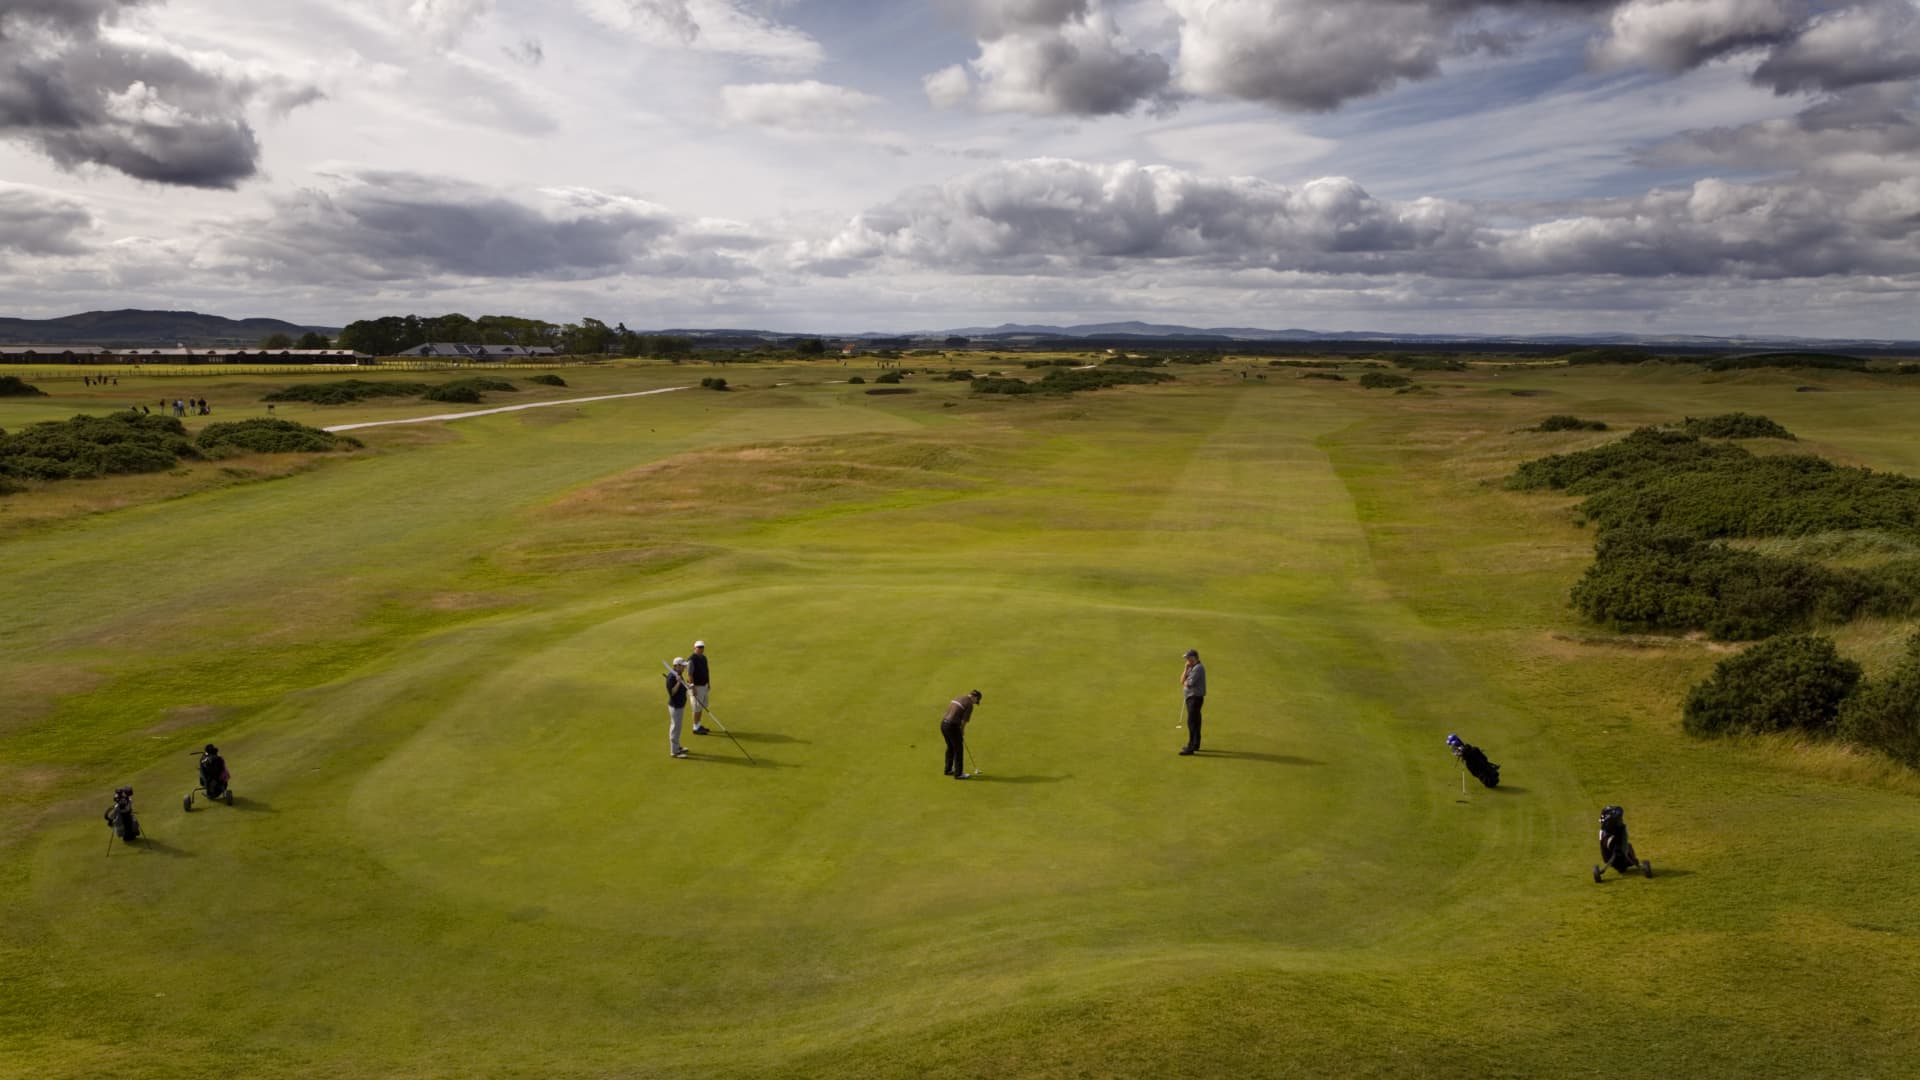 Golf vacations to top British courses are selling out this year — and next